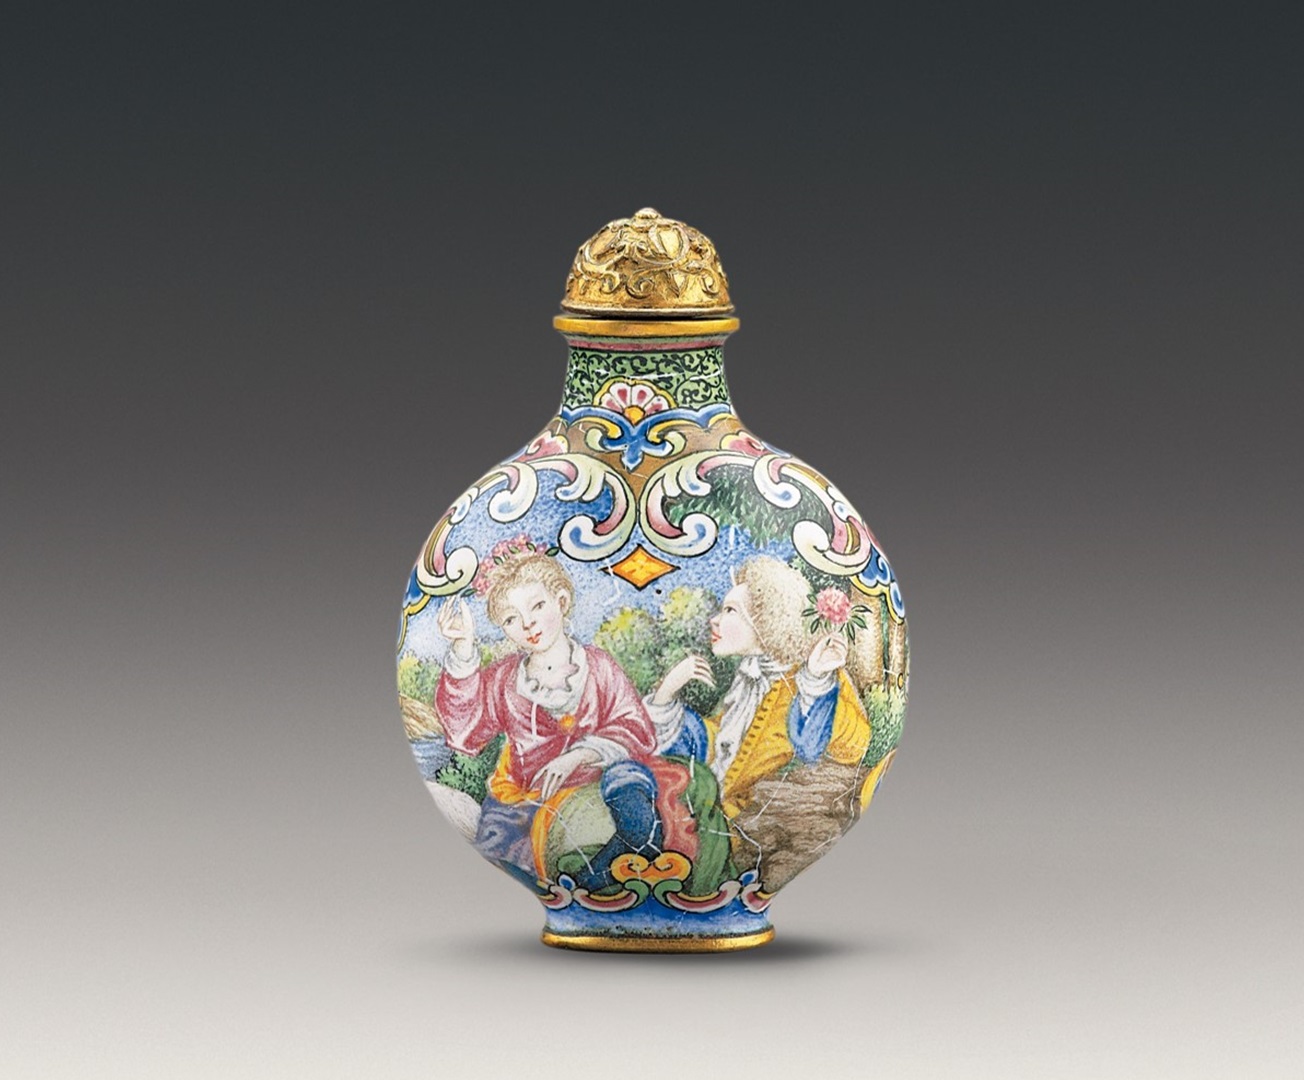 Copper snuff bottle with western figures design in painted enamels